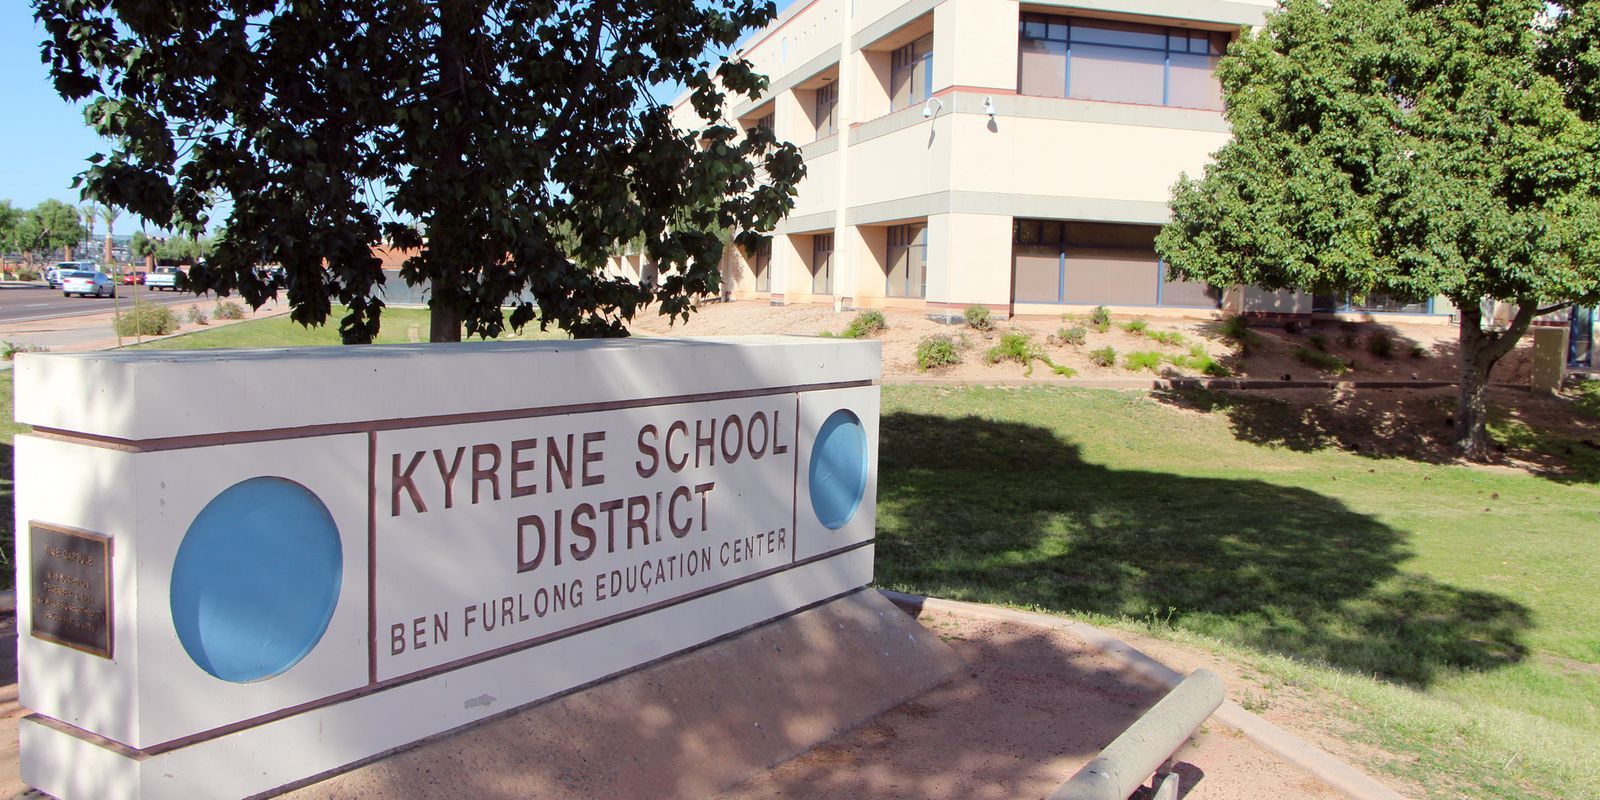 Kyrene School District Governing Board candidates tell their stories